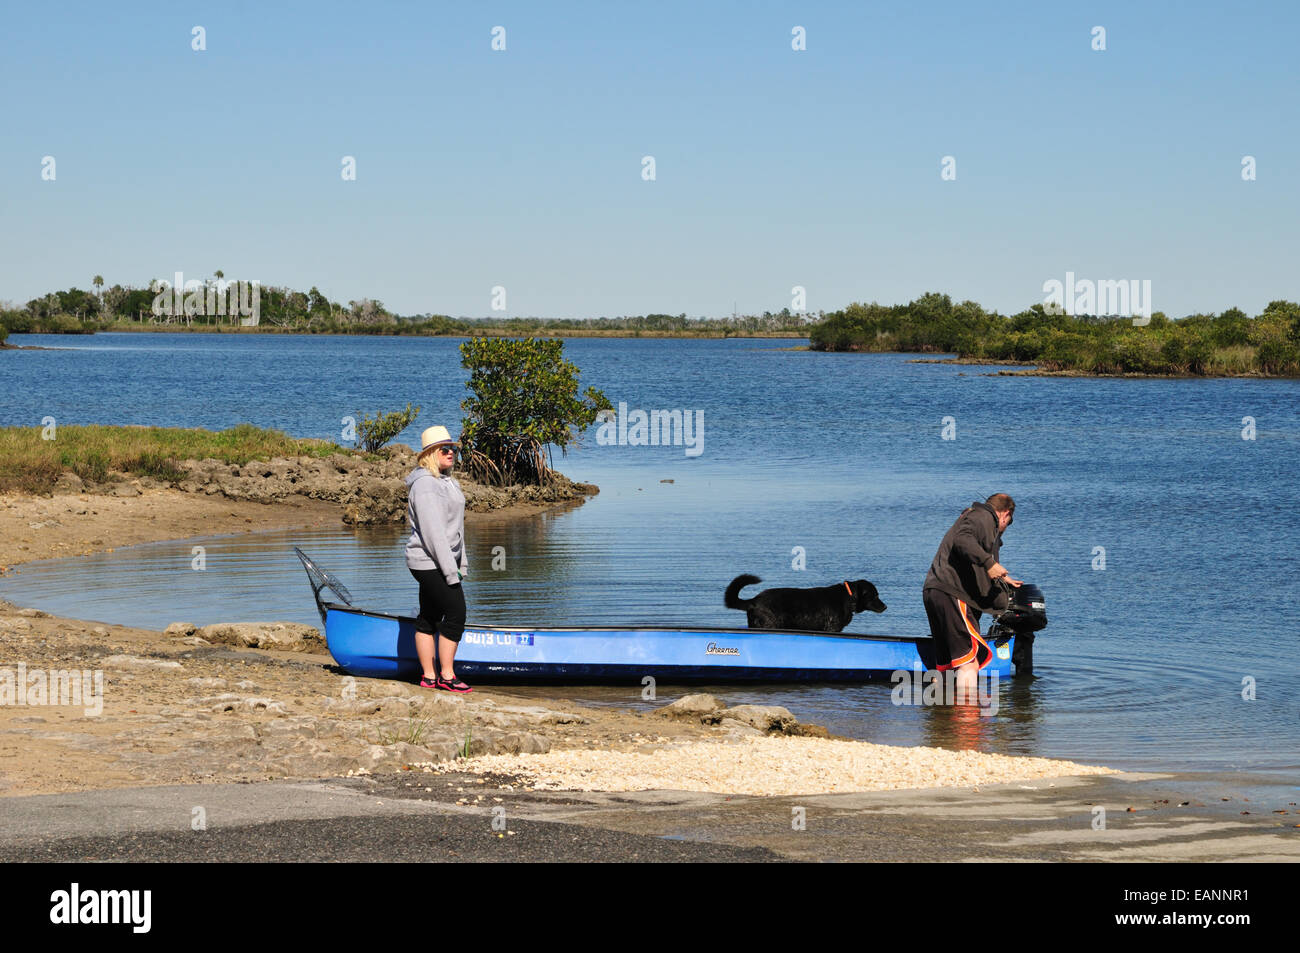 Man, woman and dog prepare to go fishing in a small boat Stock Photo